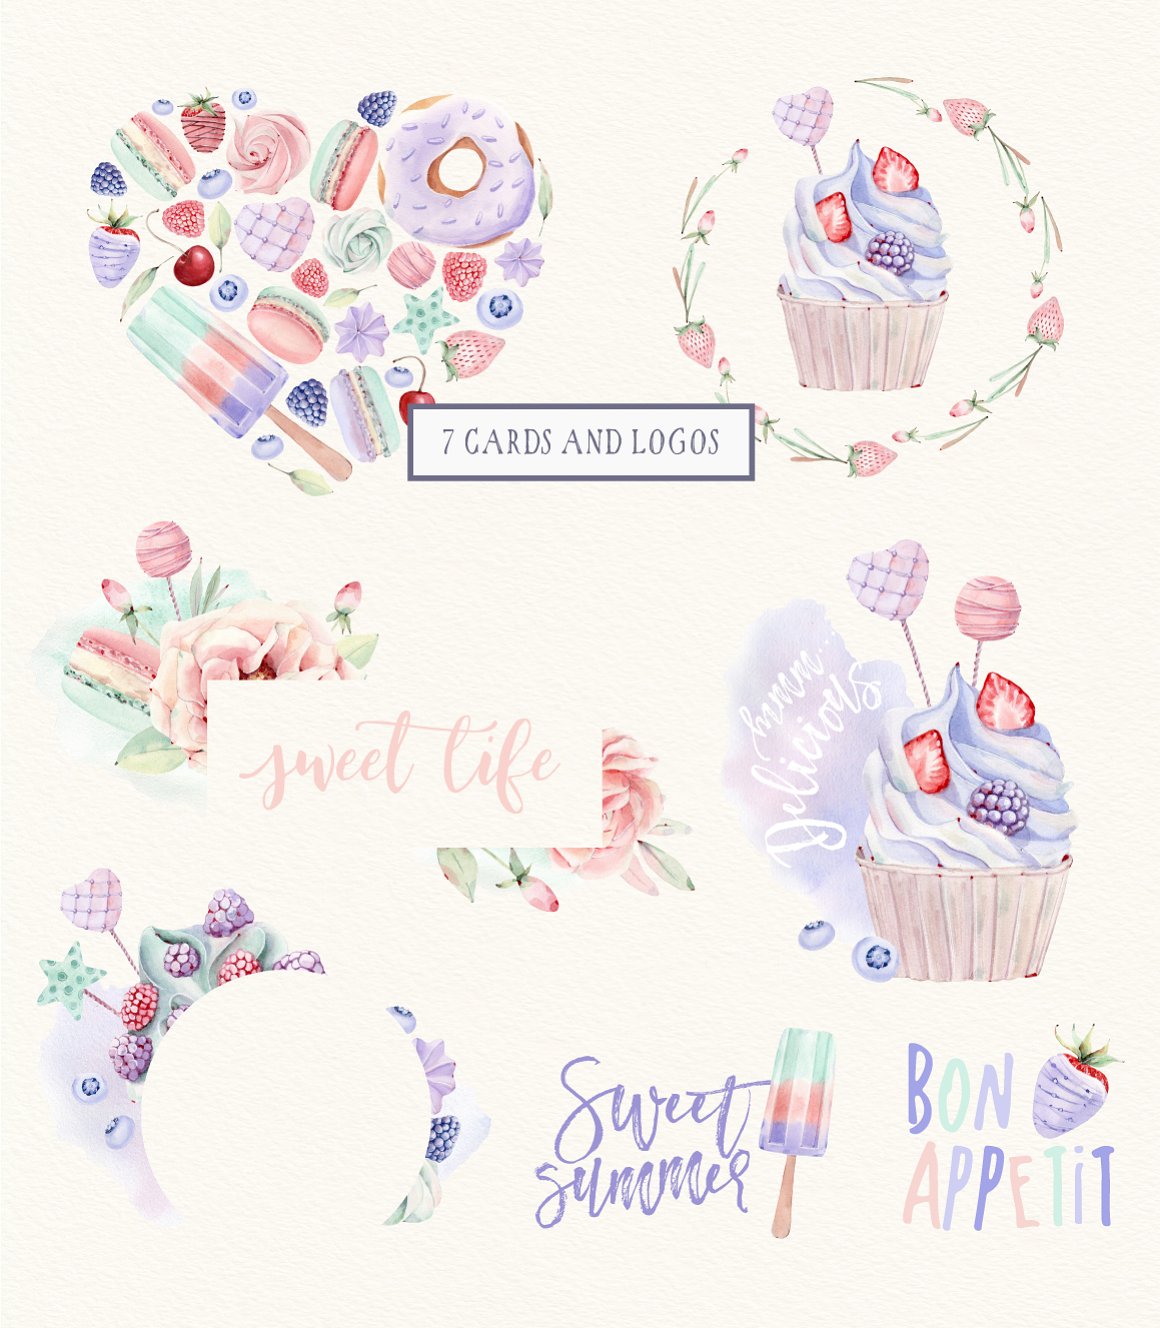 A set of 7 different cards and logos with sweet and floral illustrations on a gray background.